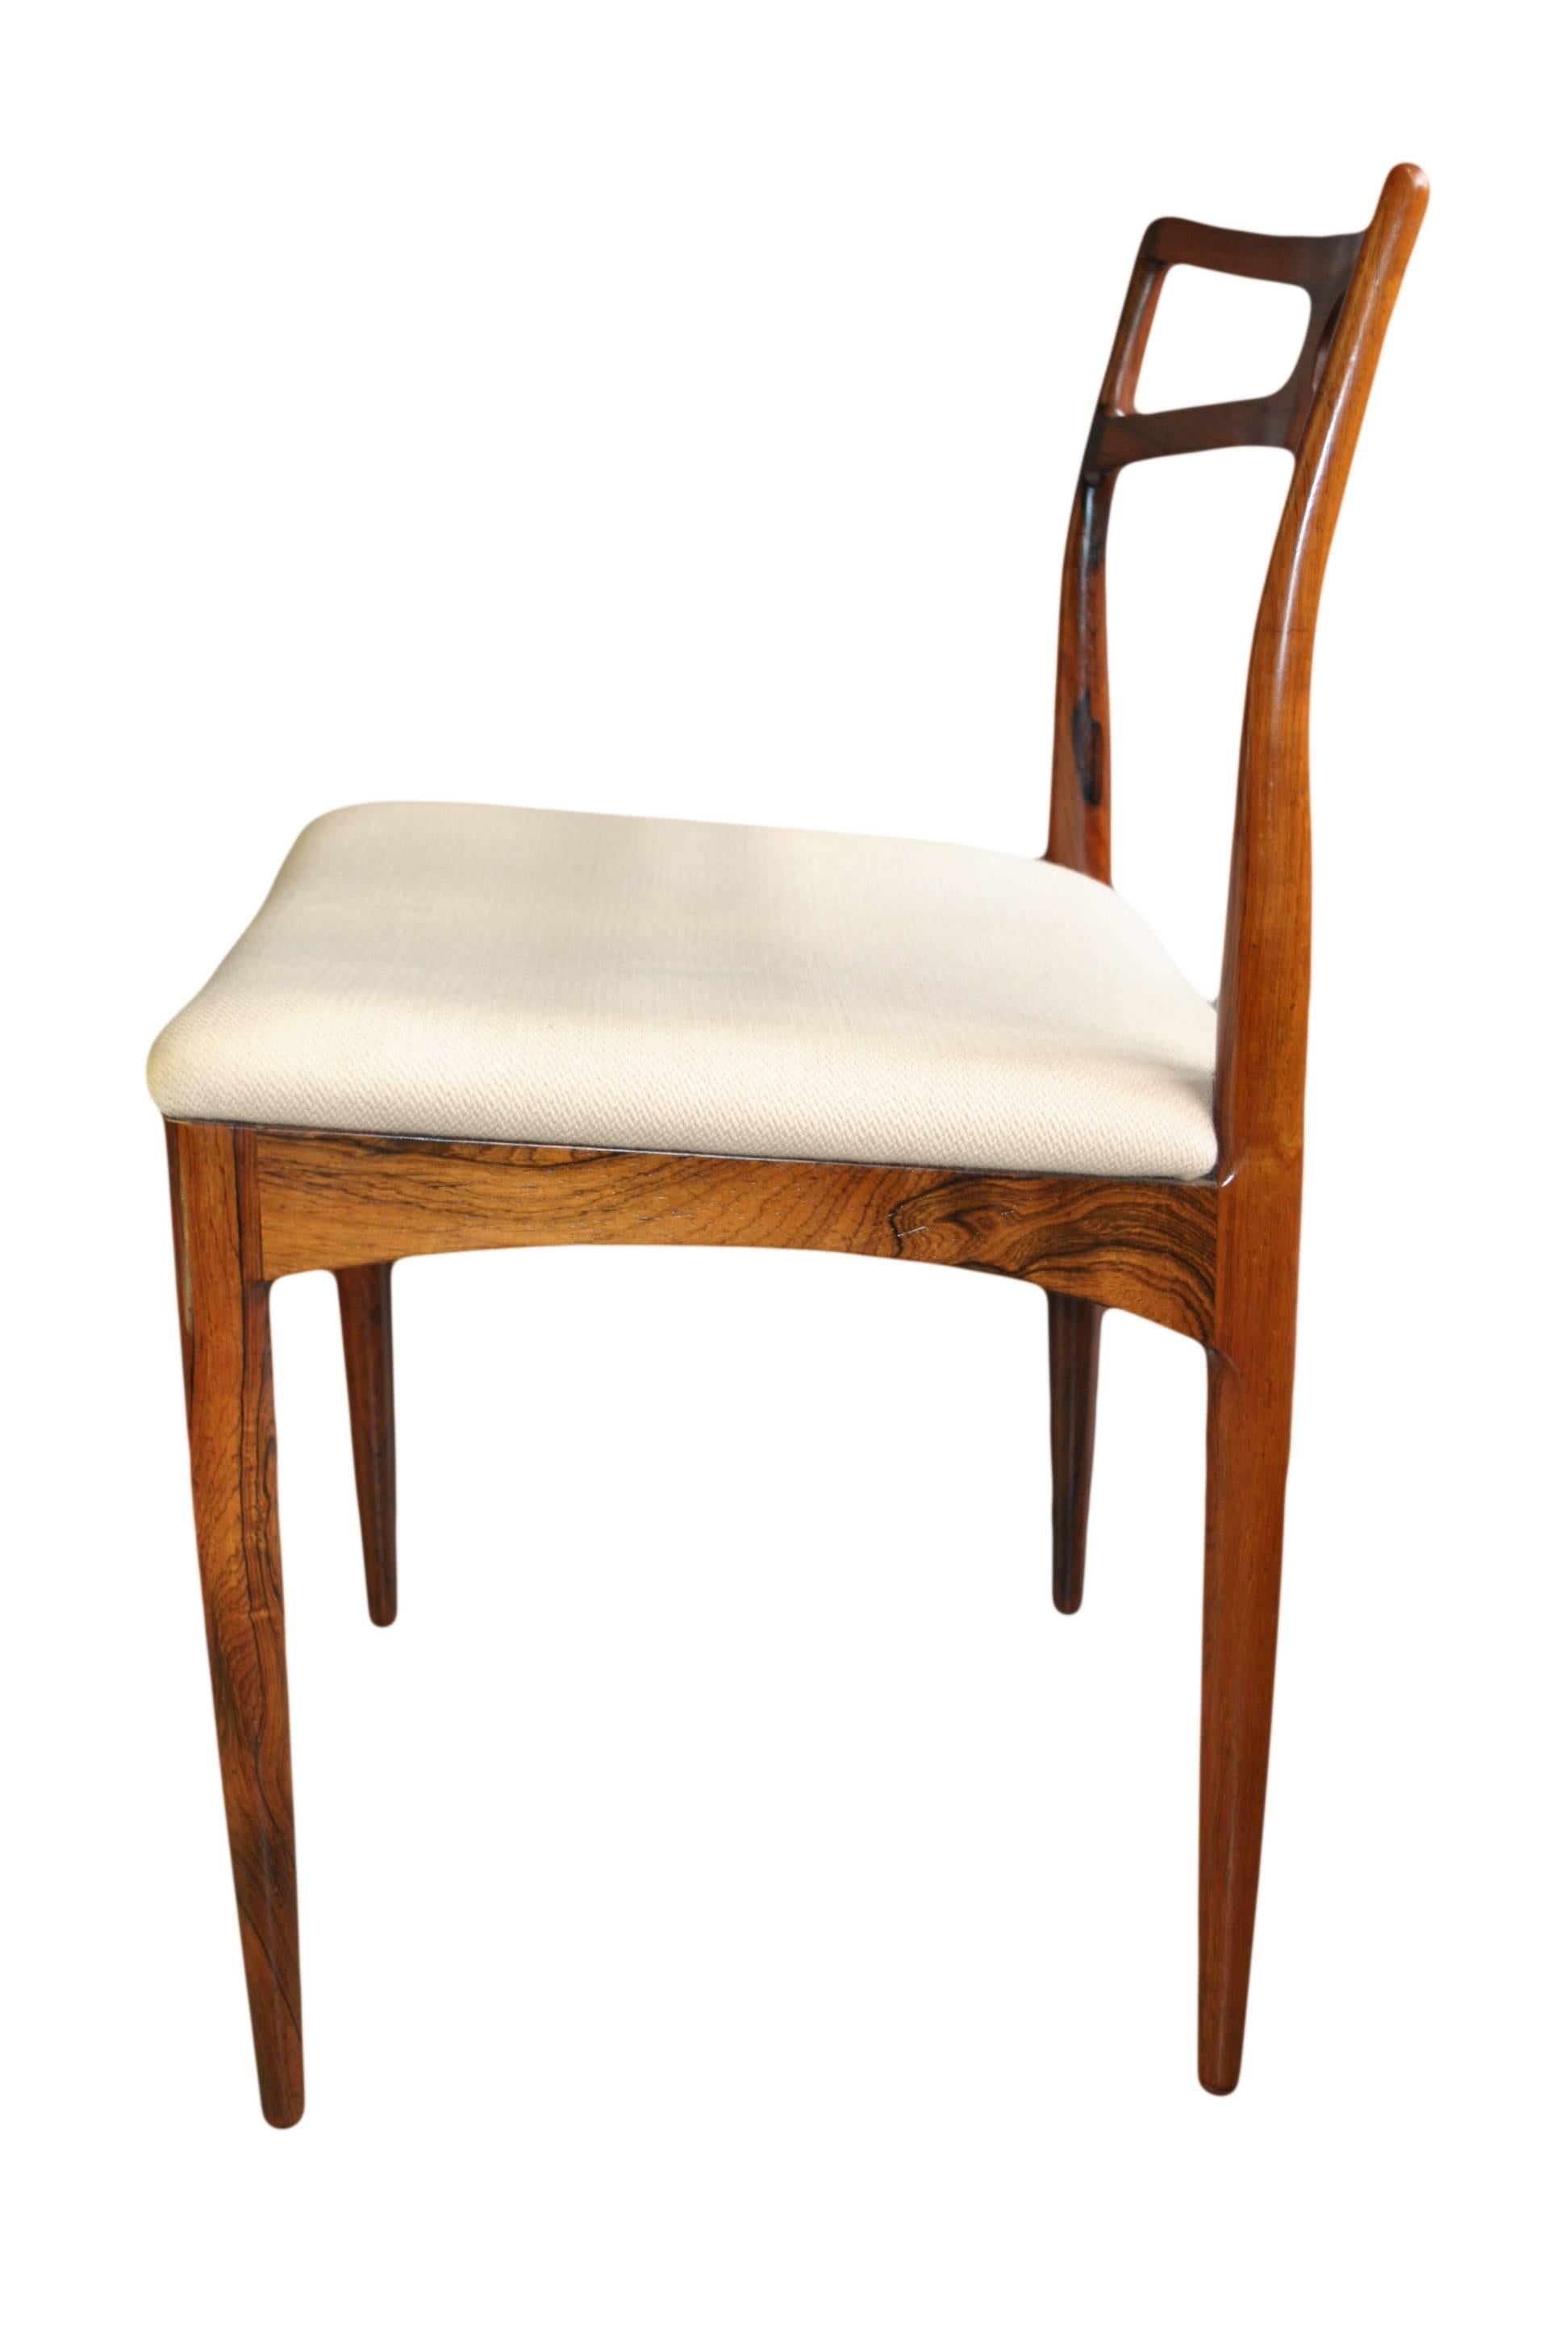 Danish Mid-Century Modern Rosewood Dining Chairs by Johannes Andersen, Set of Eight